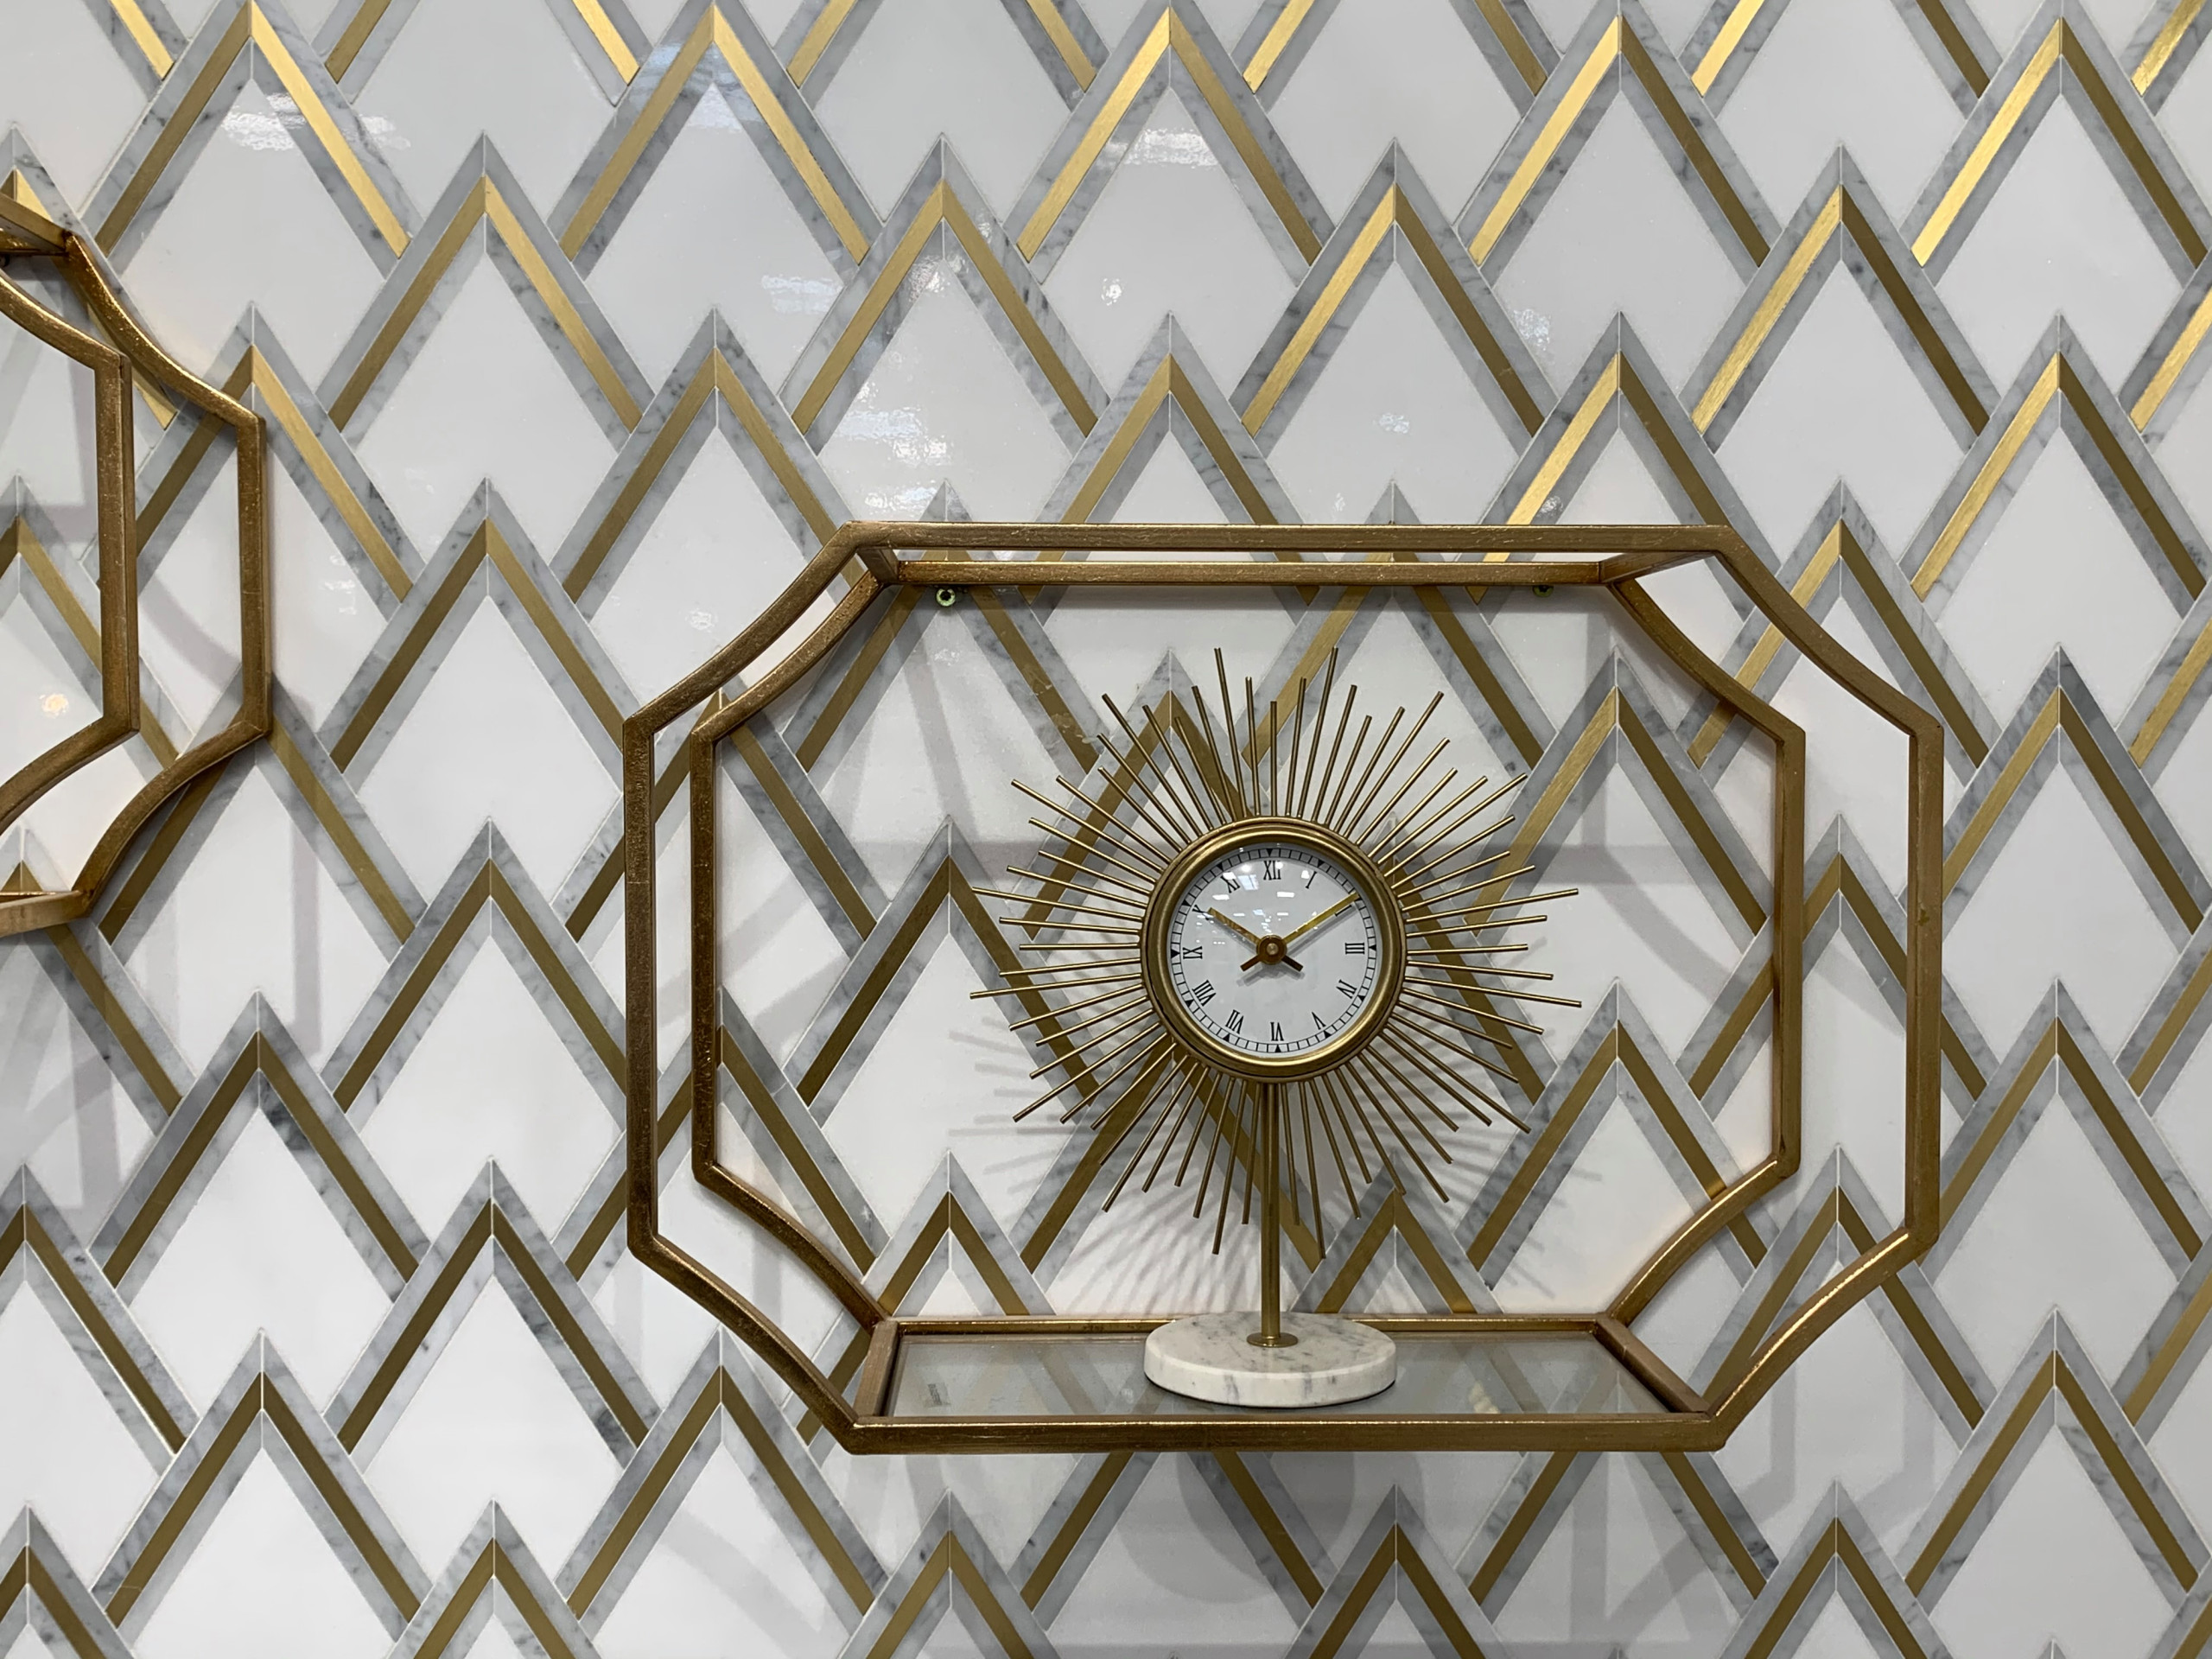 ART DECO INSPIRED TILE AS ACCENT WALL FOR BAR AREA